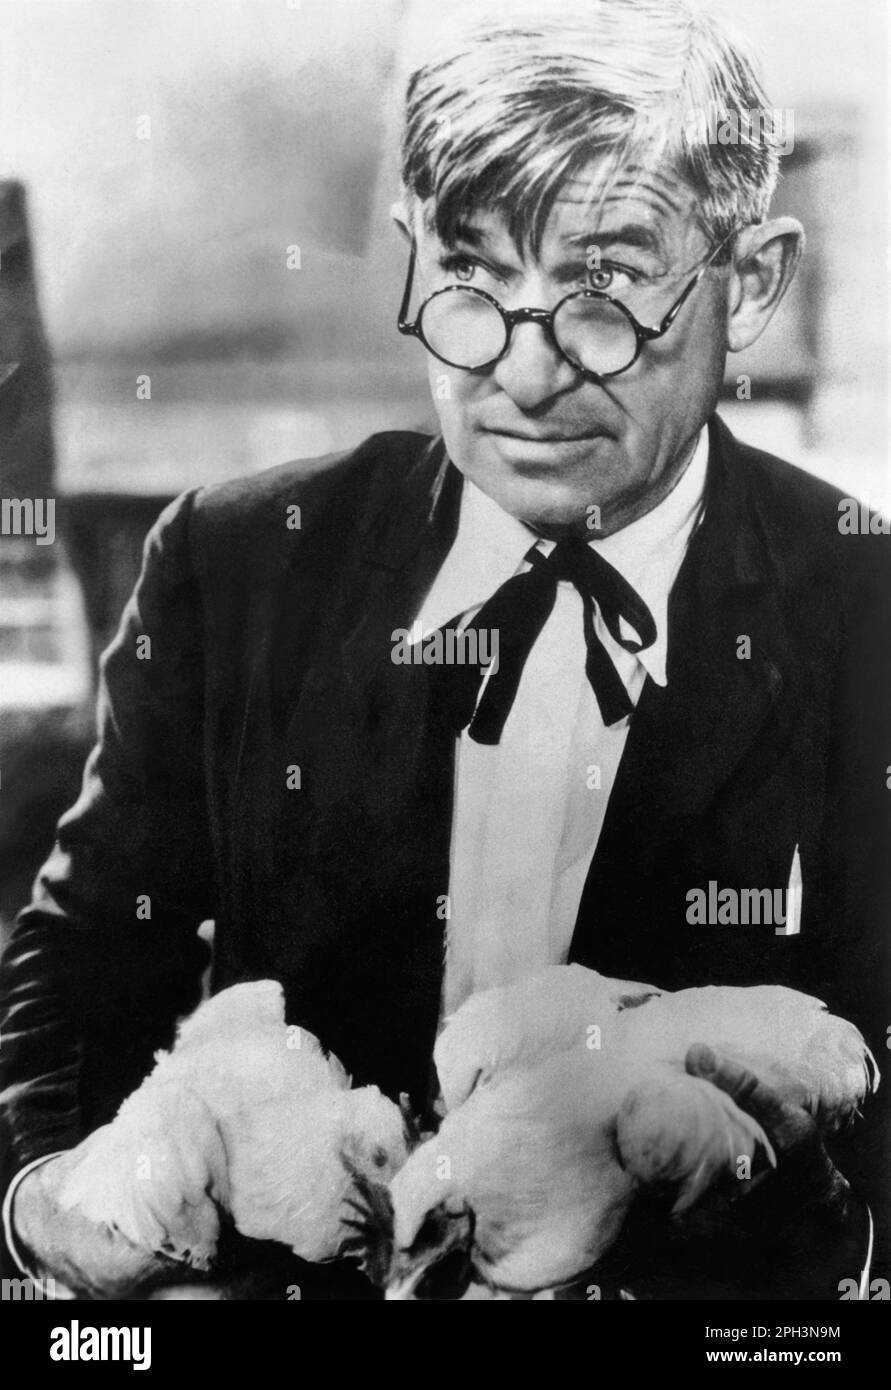 Will Rogers (1879-1935), American cowboy humorist, film star, entertainer, and writer, holding chickens in the 1930s. Stock Photo